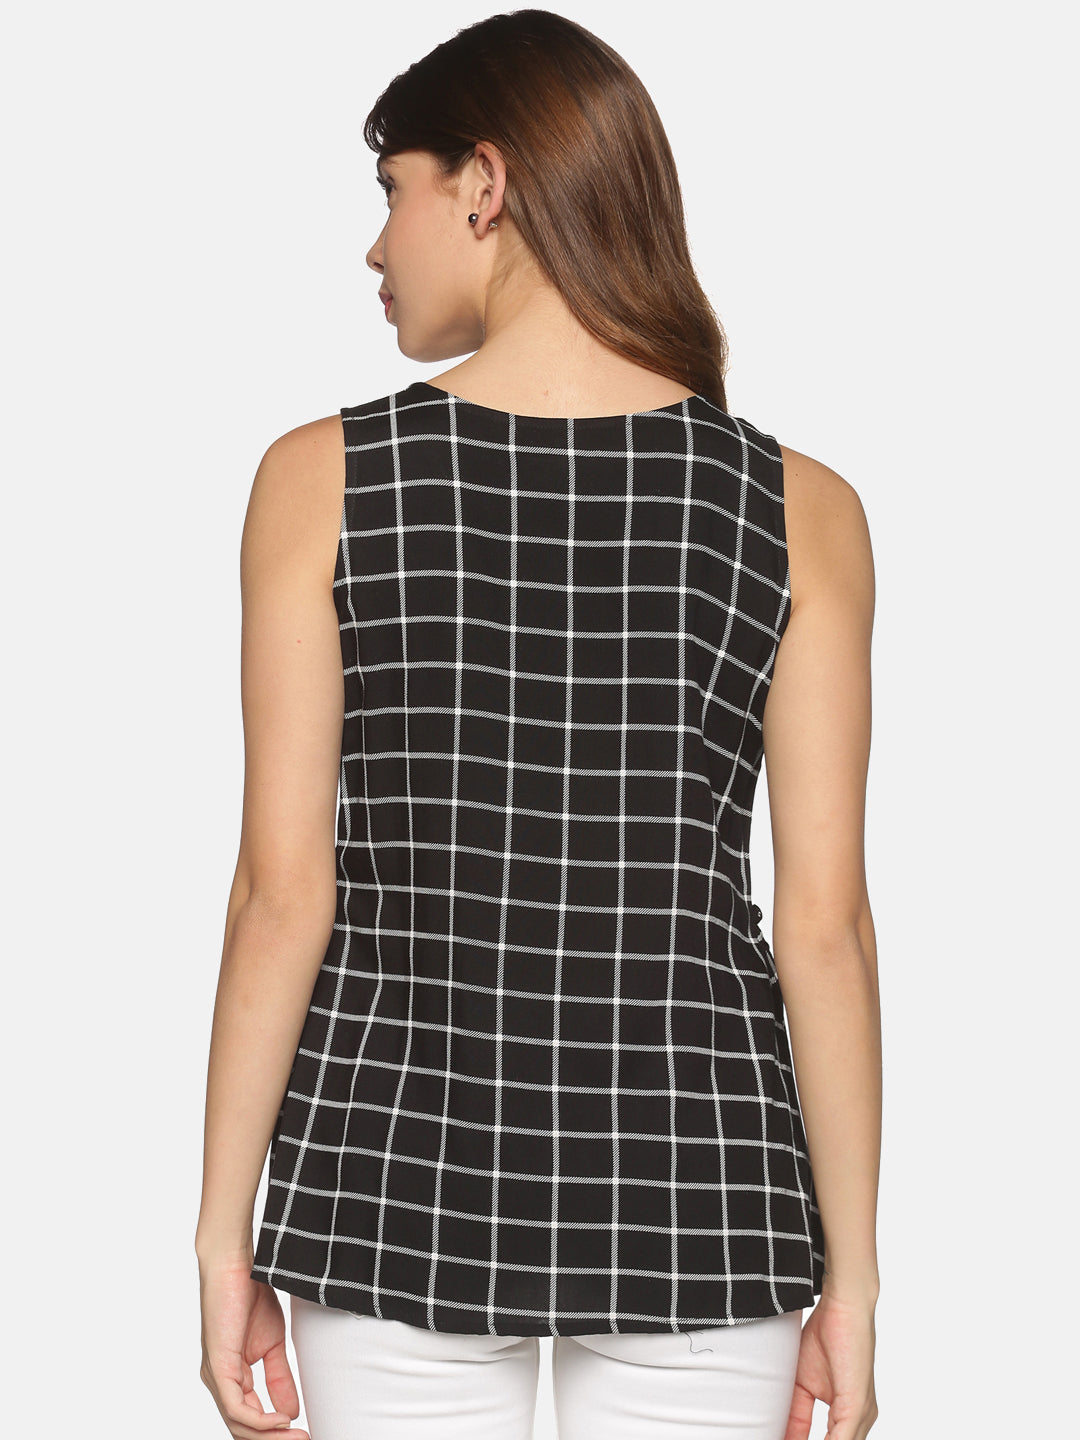 Black Checks Panelled Top with Gathers & Lace Insert on Front Yoke